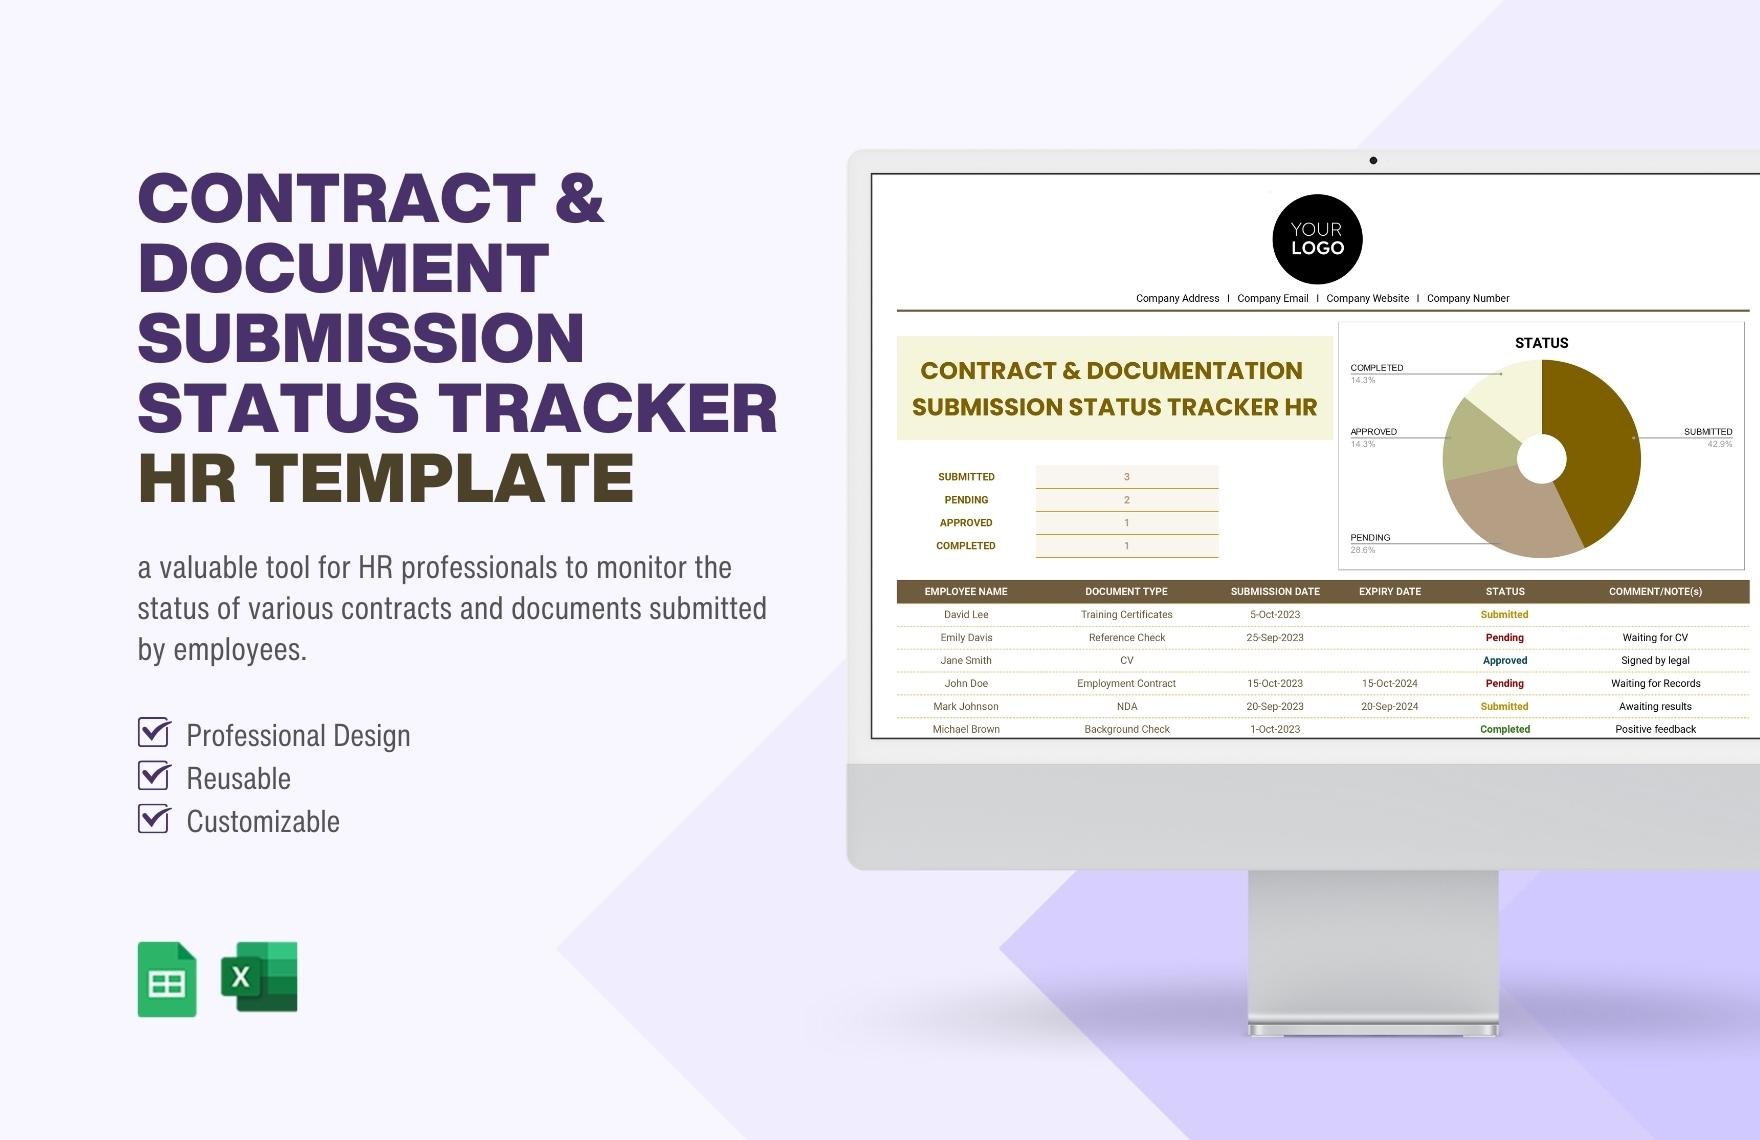 Contract & Document Submission Status Tracker HR Template in Excel, Google Sheets